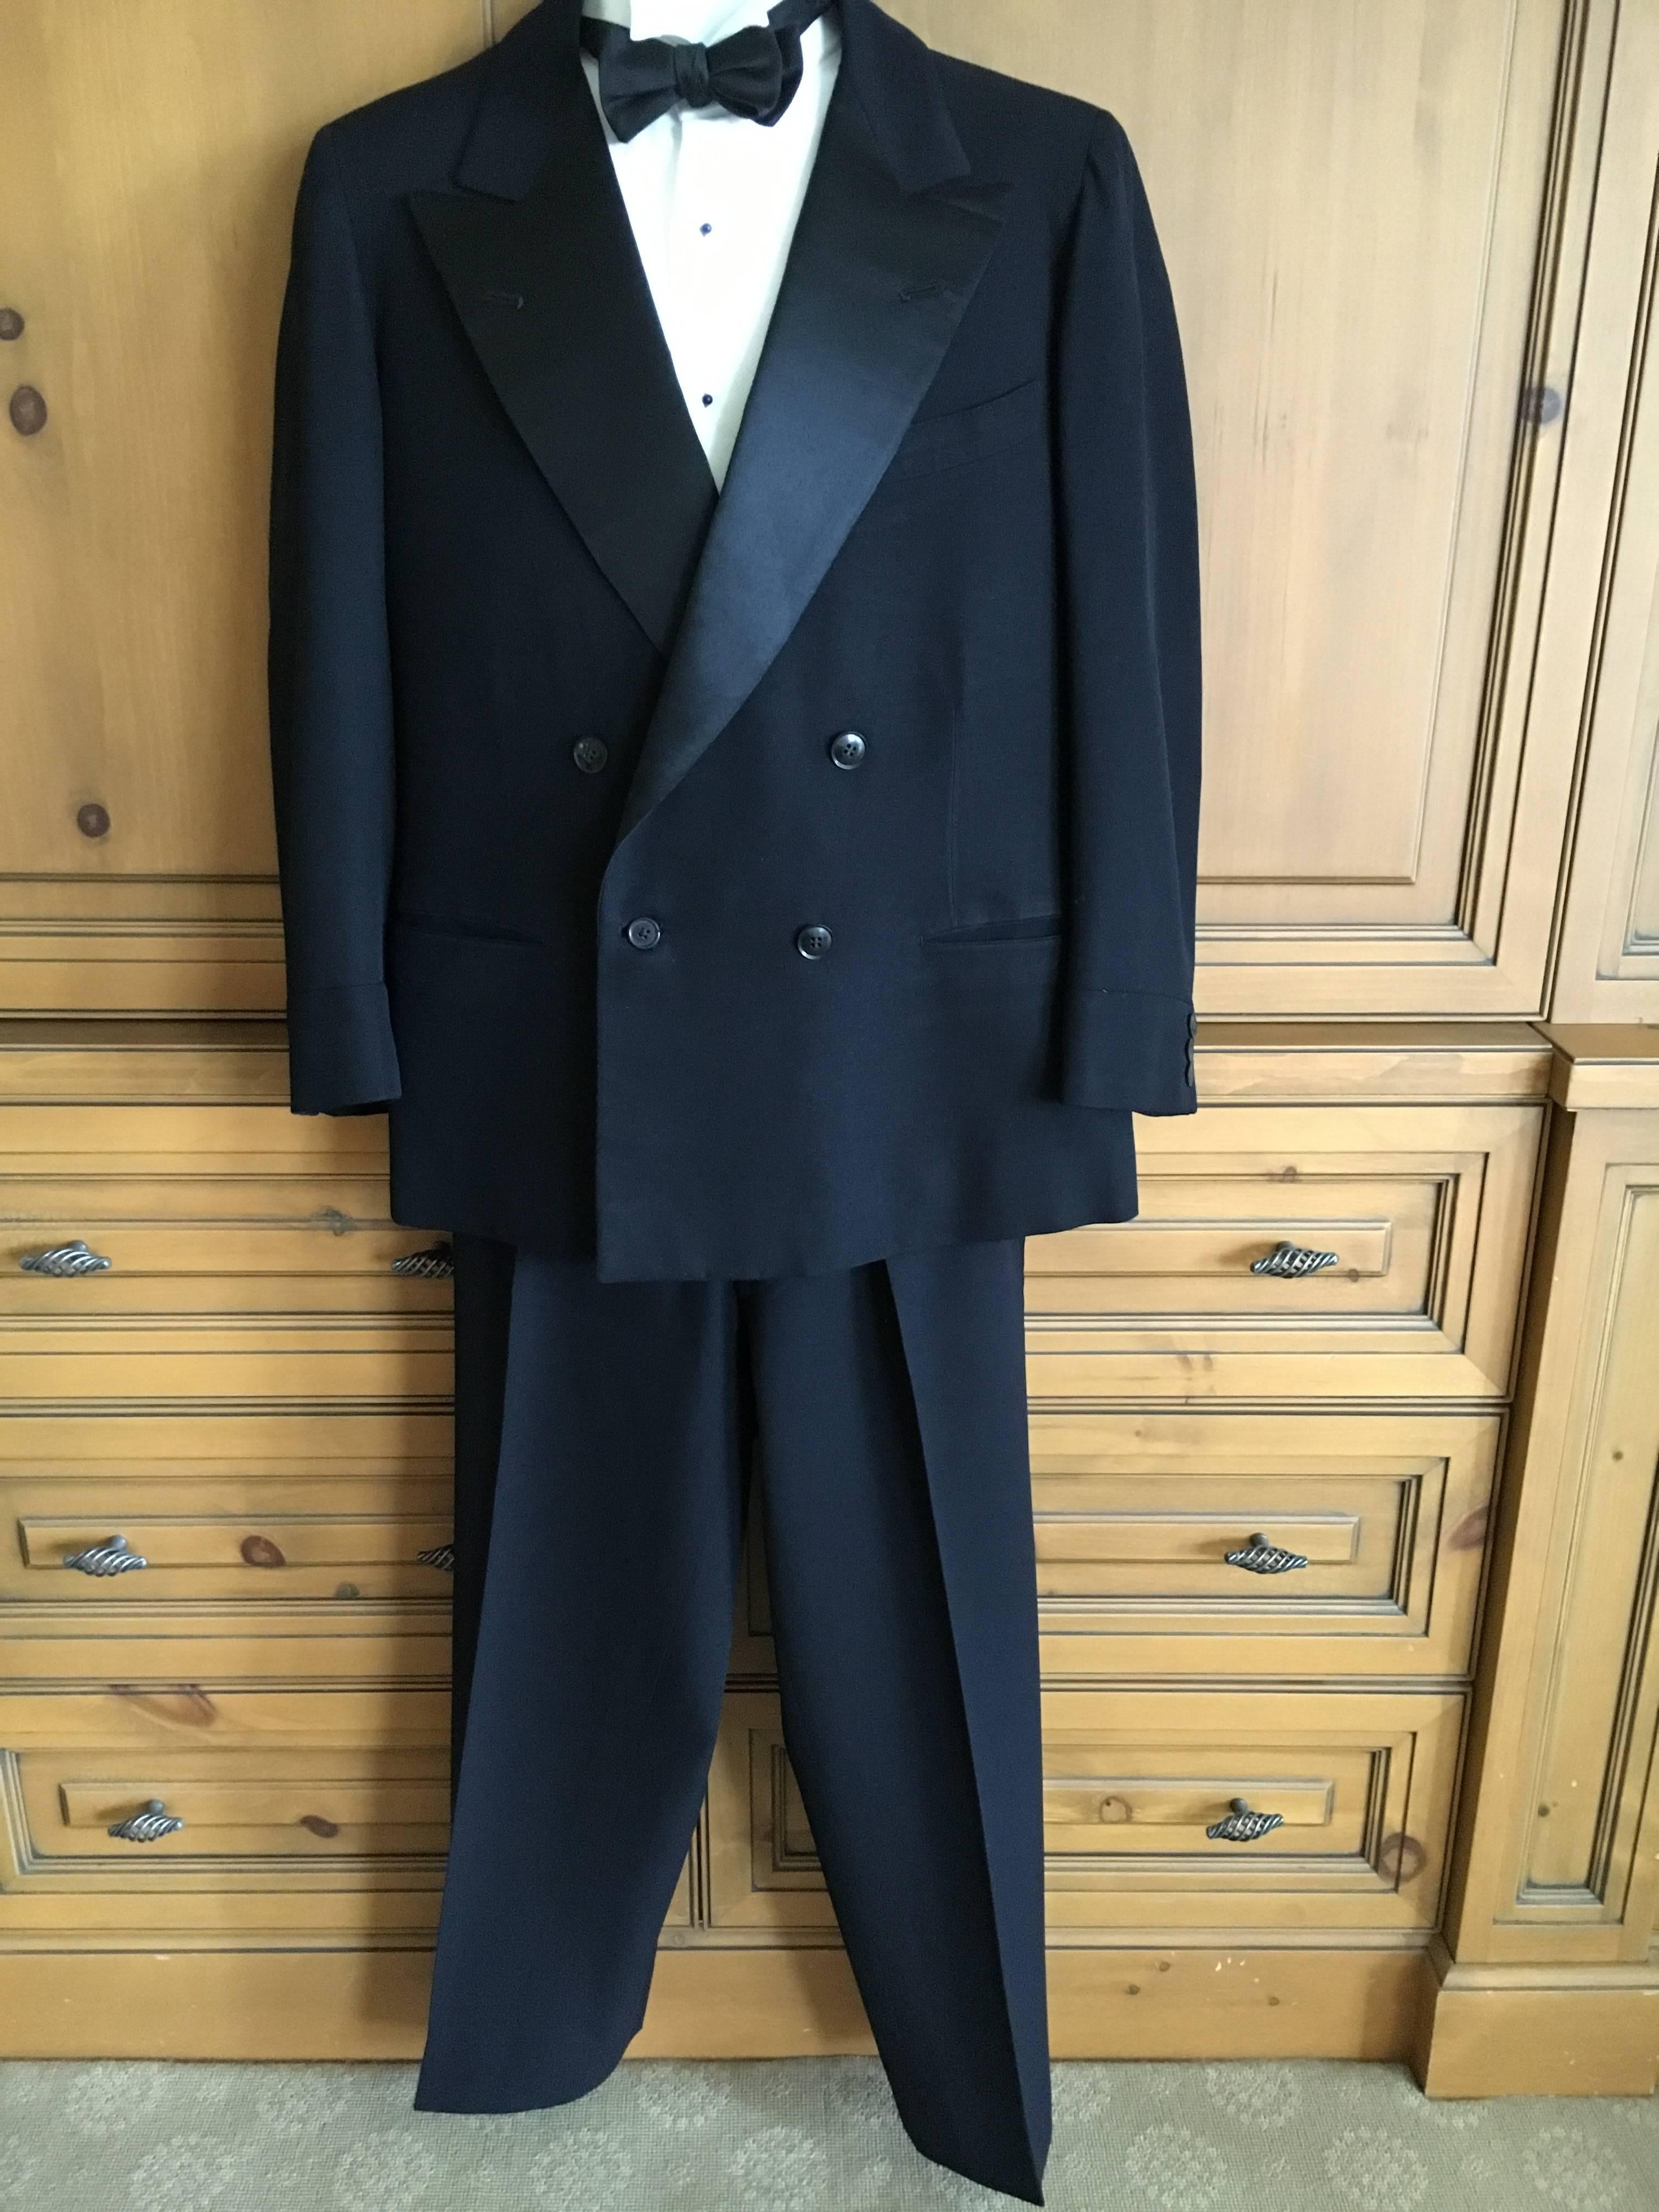 1936 Gentleman's Peak Satin Lapel Tuxedo from Society Tailor F.L. Dunne & Co. NY For Sale 4